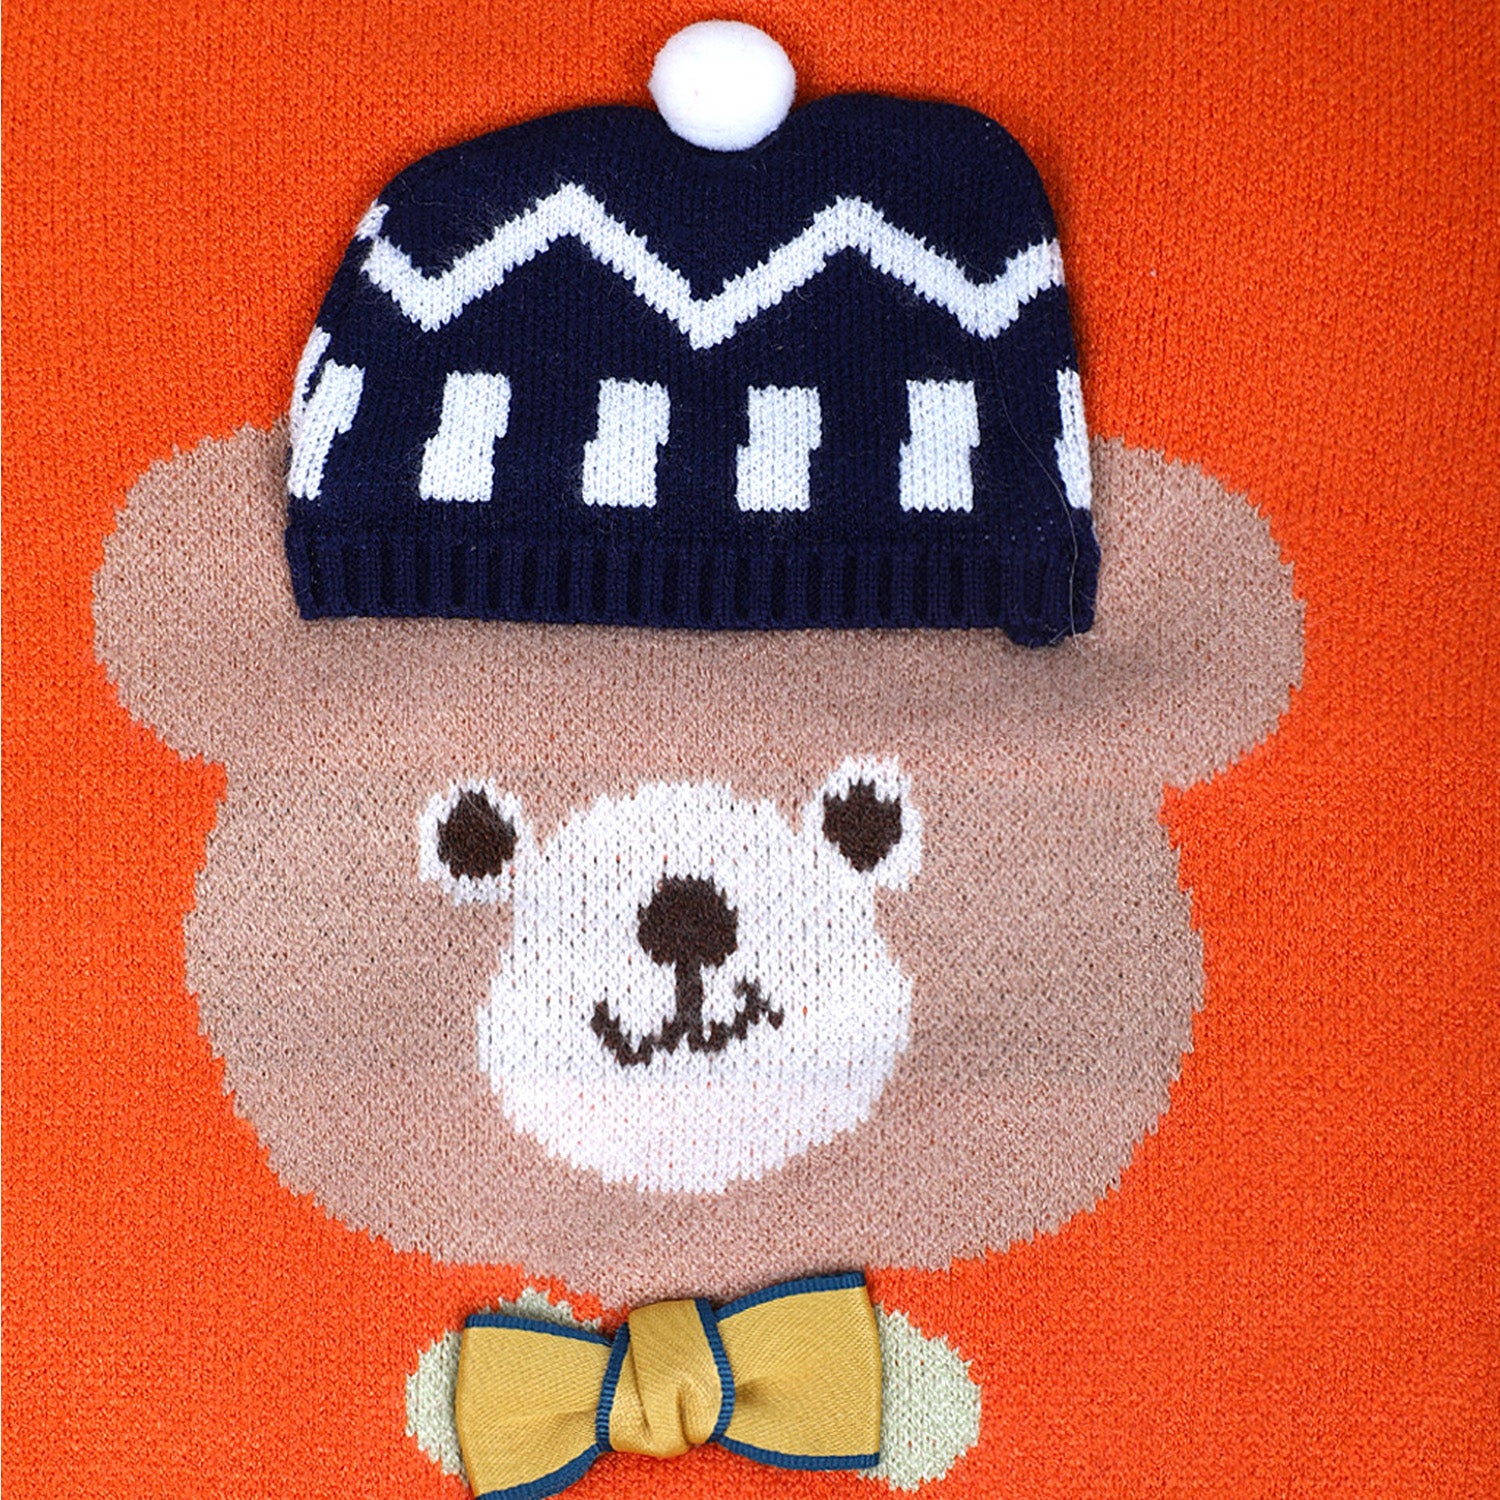 Mr. Bear Premium Full Sleeves Knitted Sweater With 3D Applique - Orange - Baby Moo